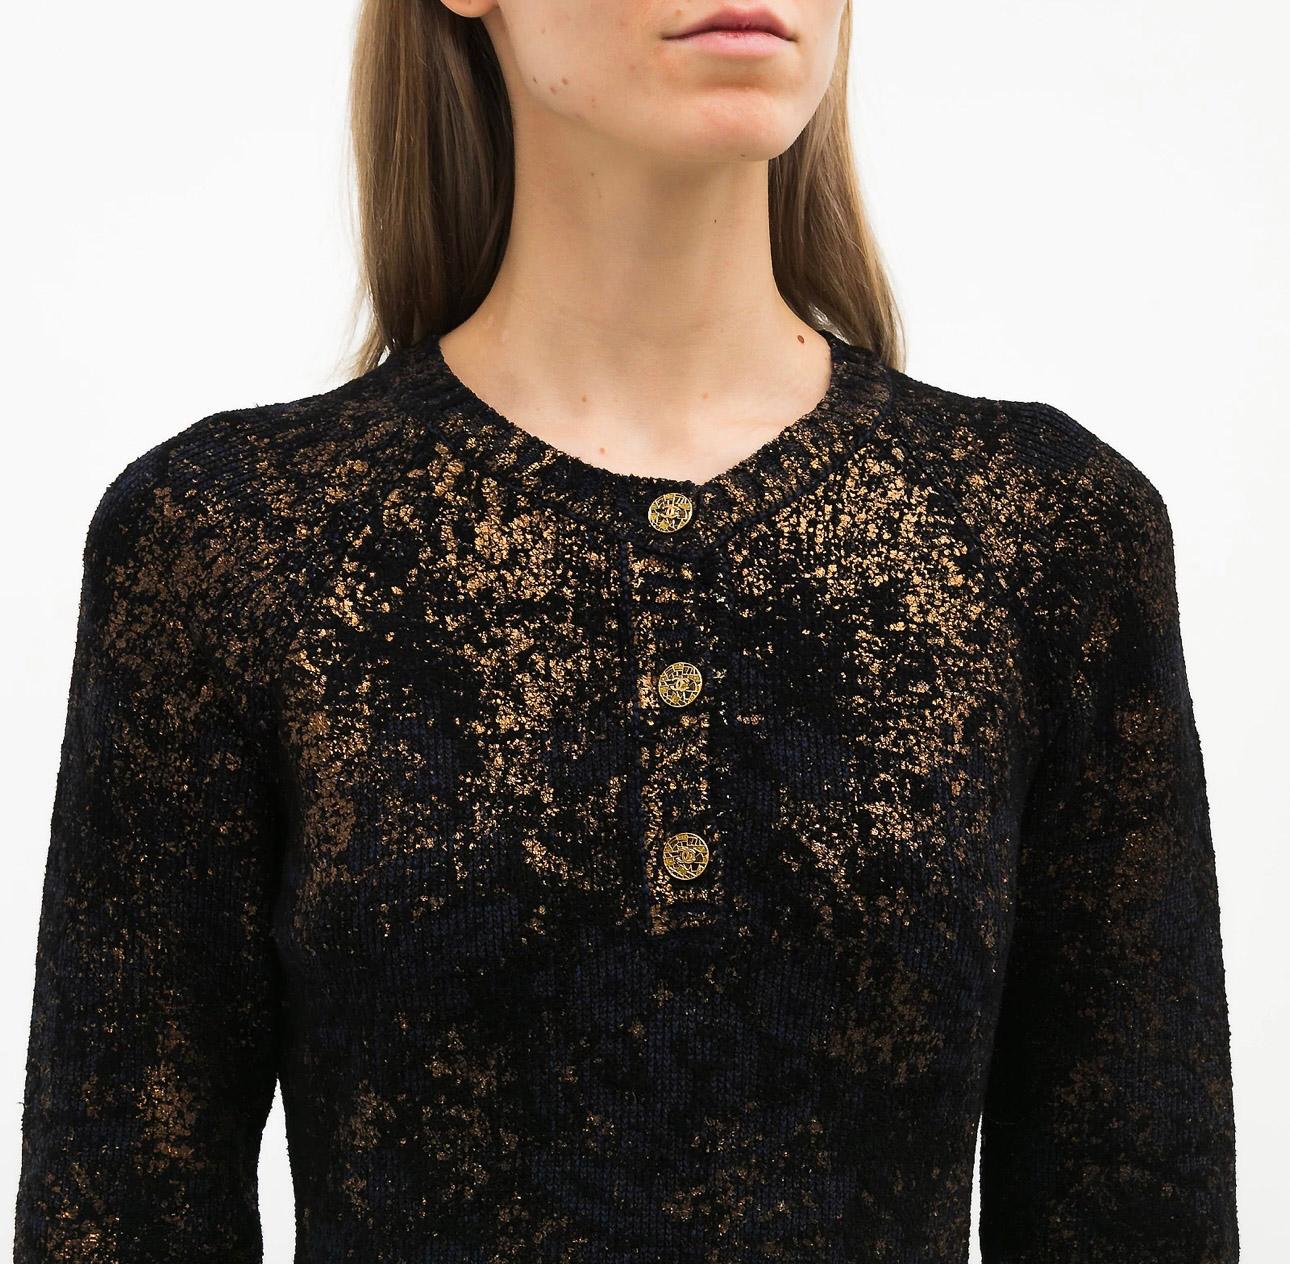 Boutique price 5,680$
Stunning Chanel cashmere dress with fading metallic coating from paris / BYZANCE Collection, 2012 Metiers d'Art
- CC logo jewel buttons at front
Size mark 34 FR. Never worn, condition of a new